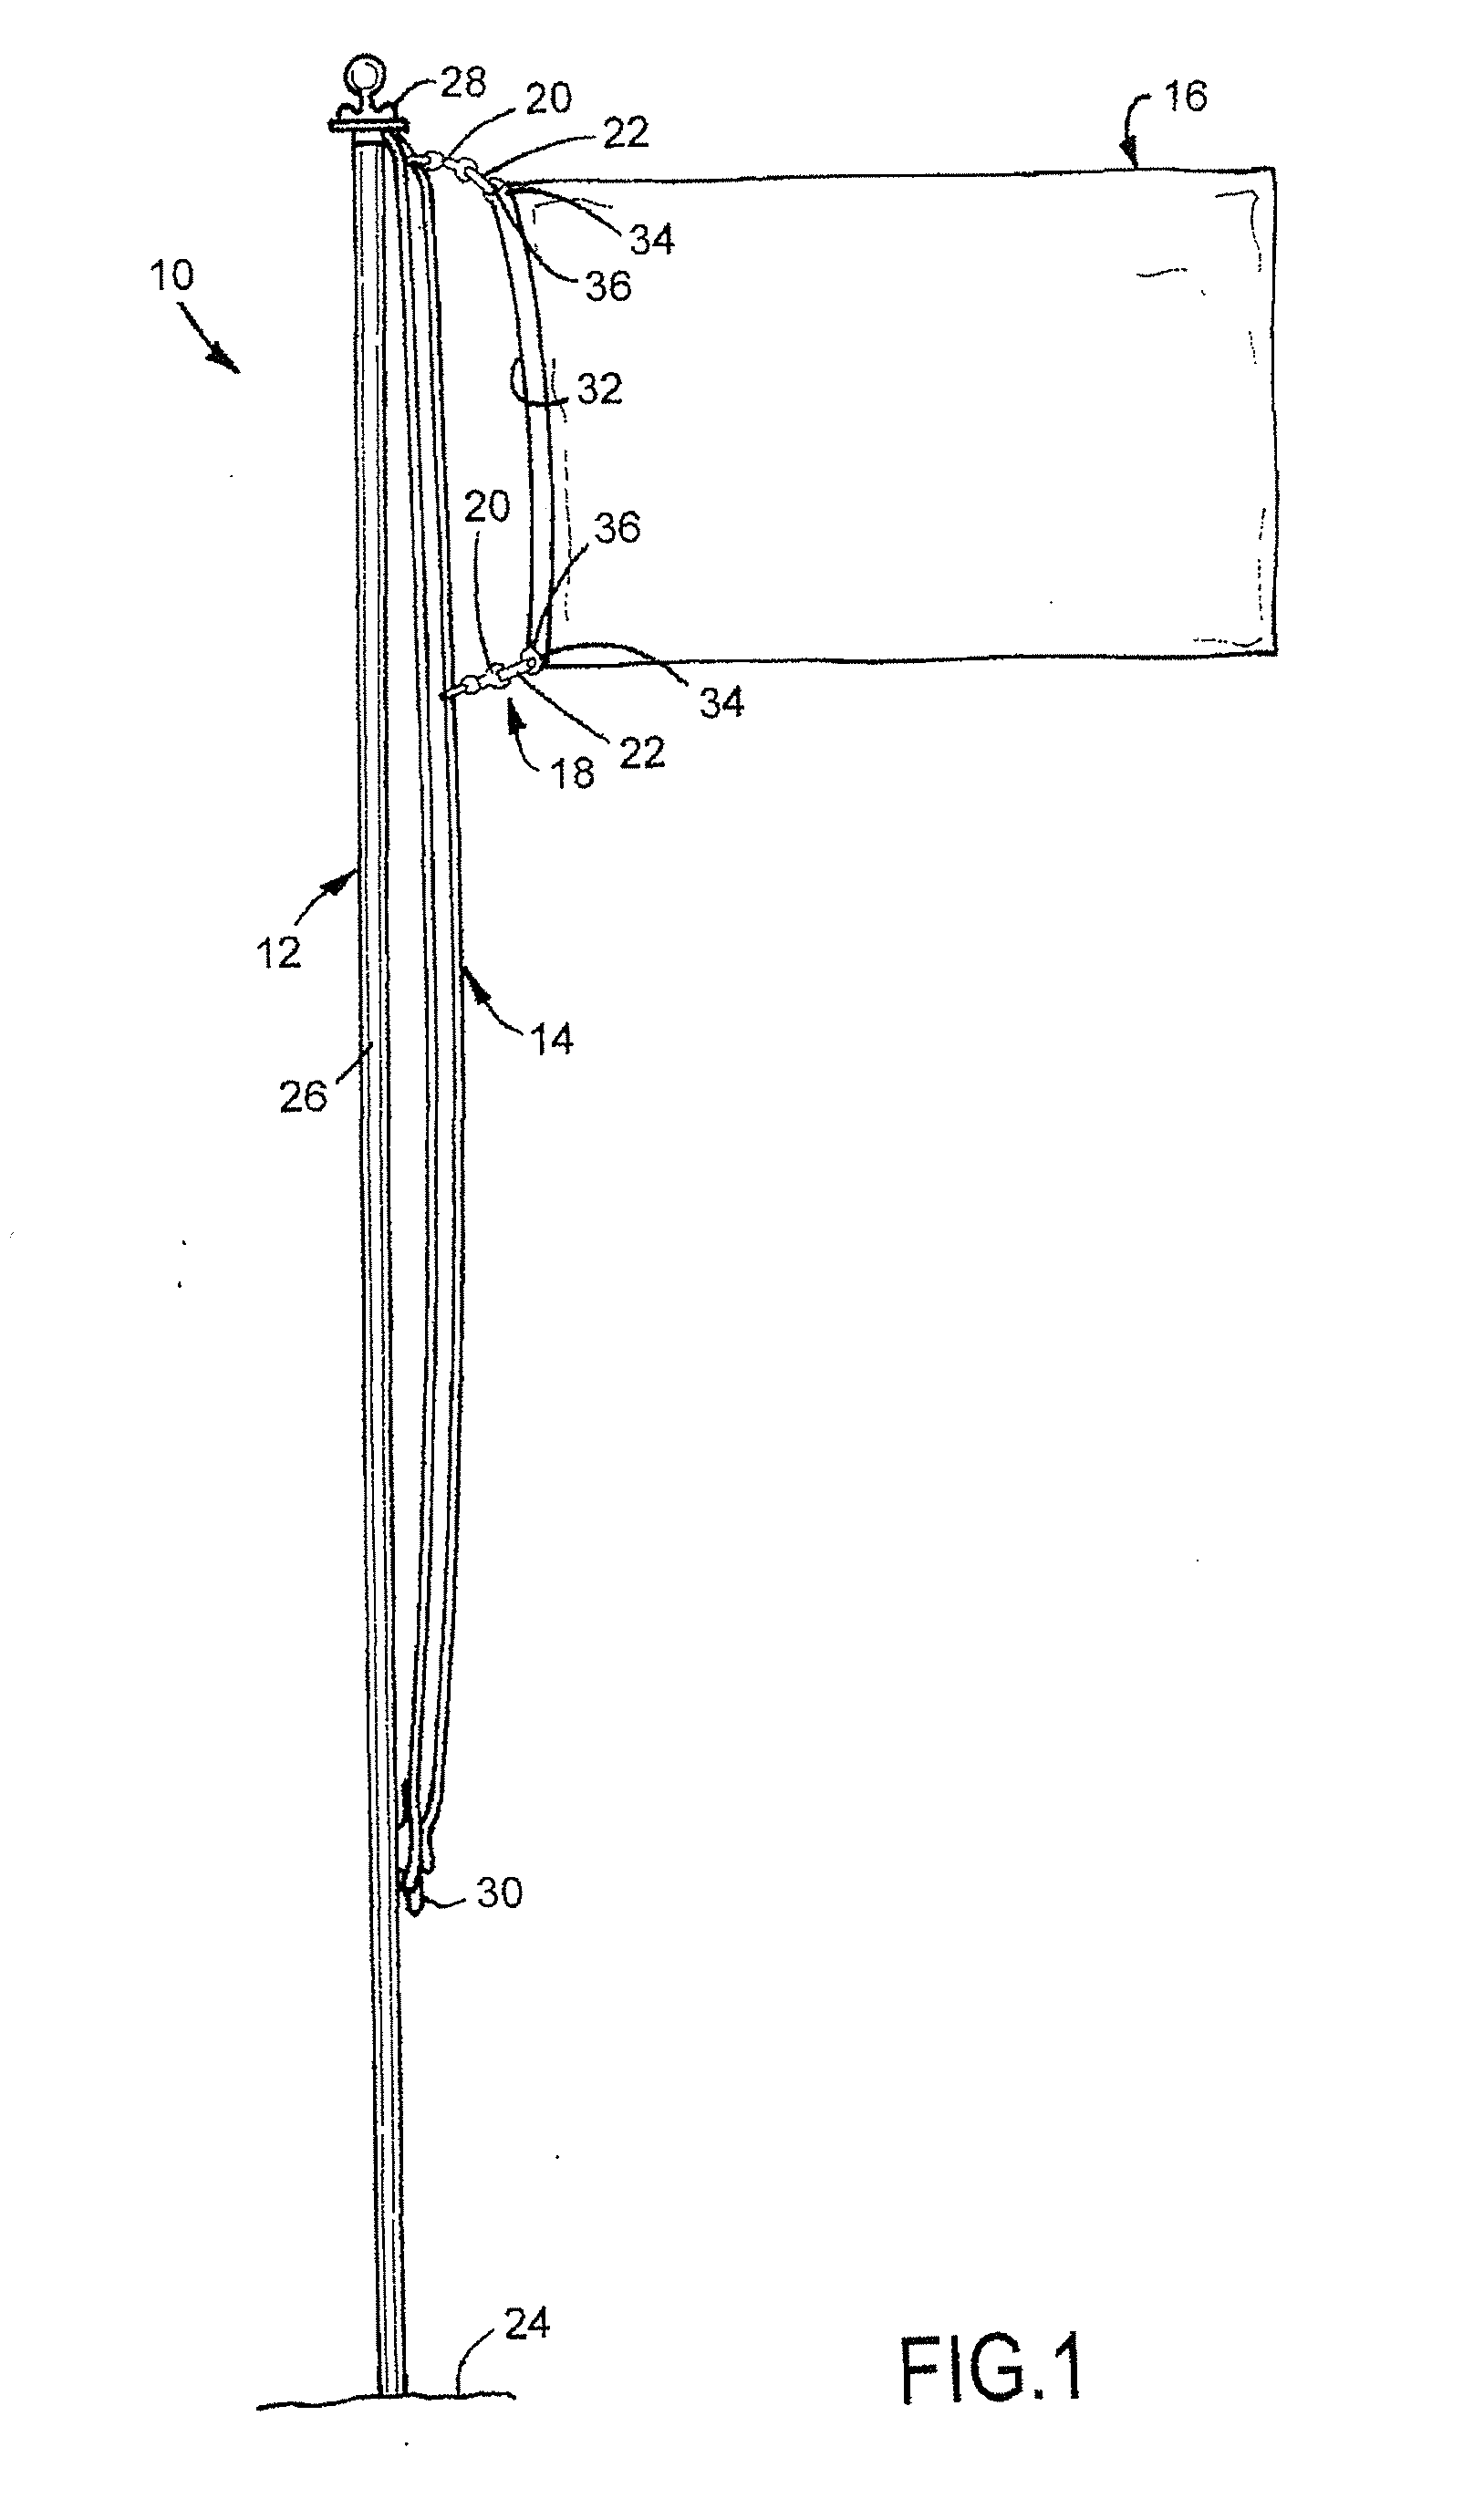 Bridge device for connecting a flag to a shackle